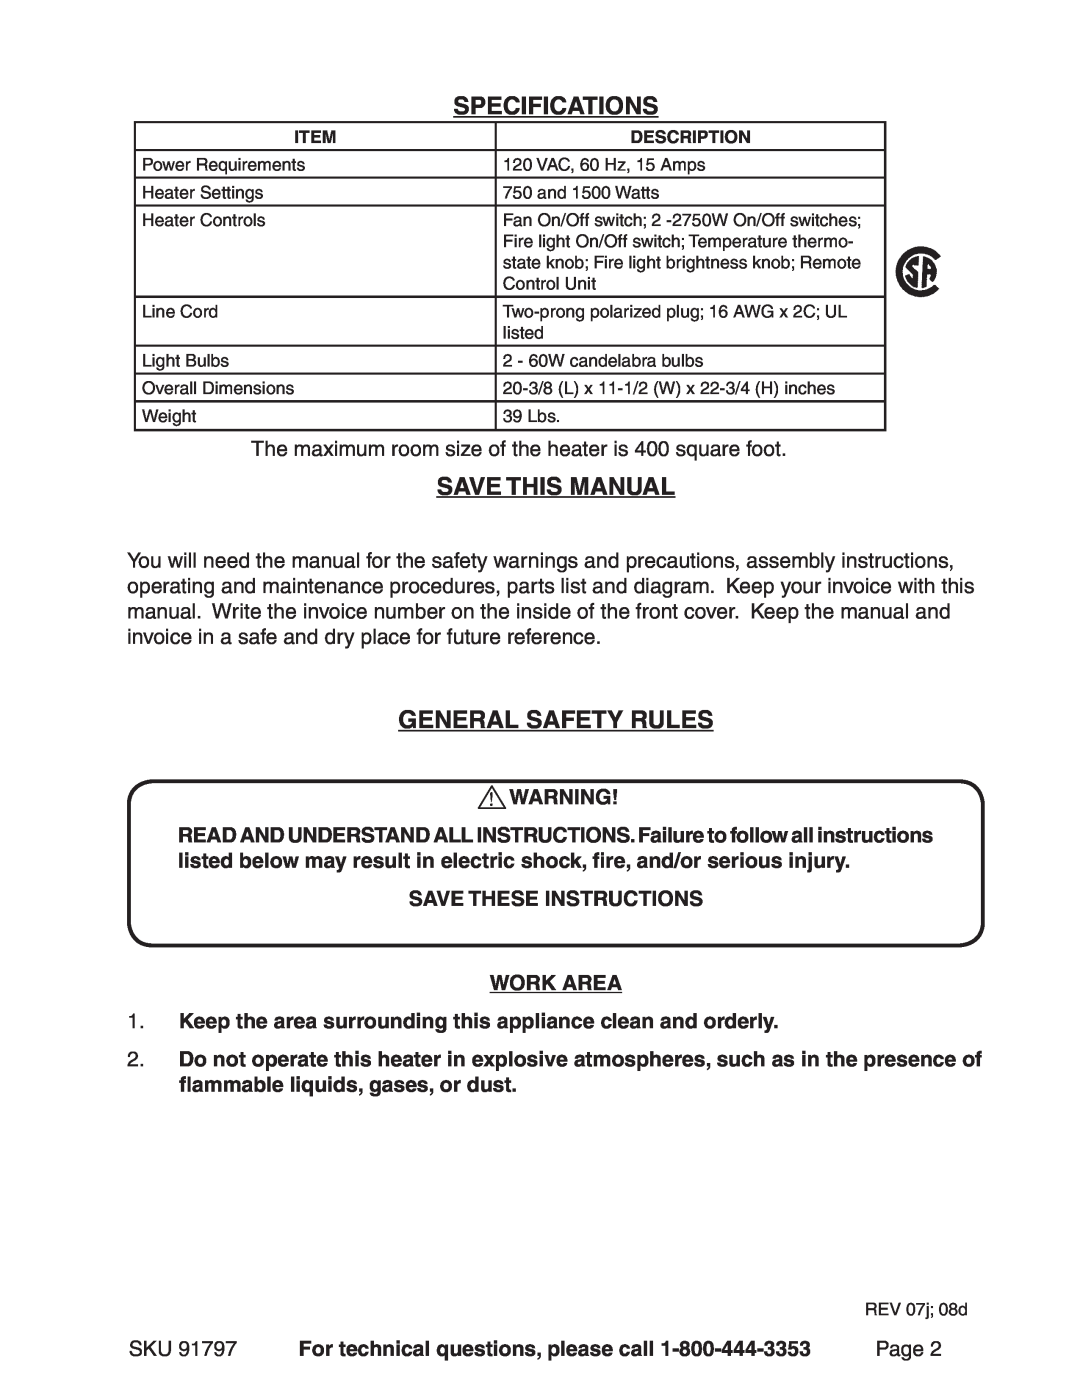 Harbor Freight Tools 91797 Specifications, Save This Manual, General Safety Rules, Save These Instructions Work Area 